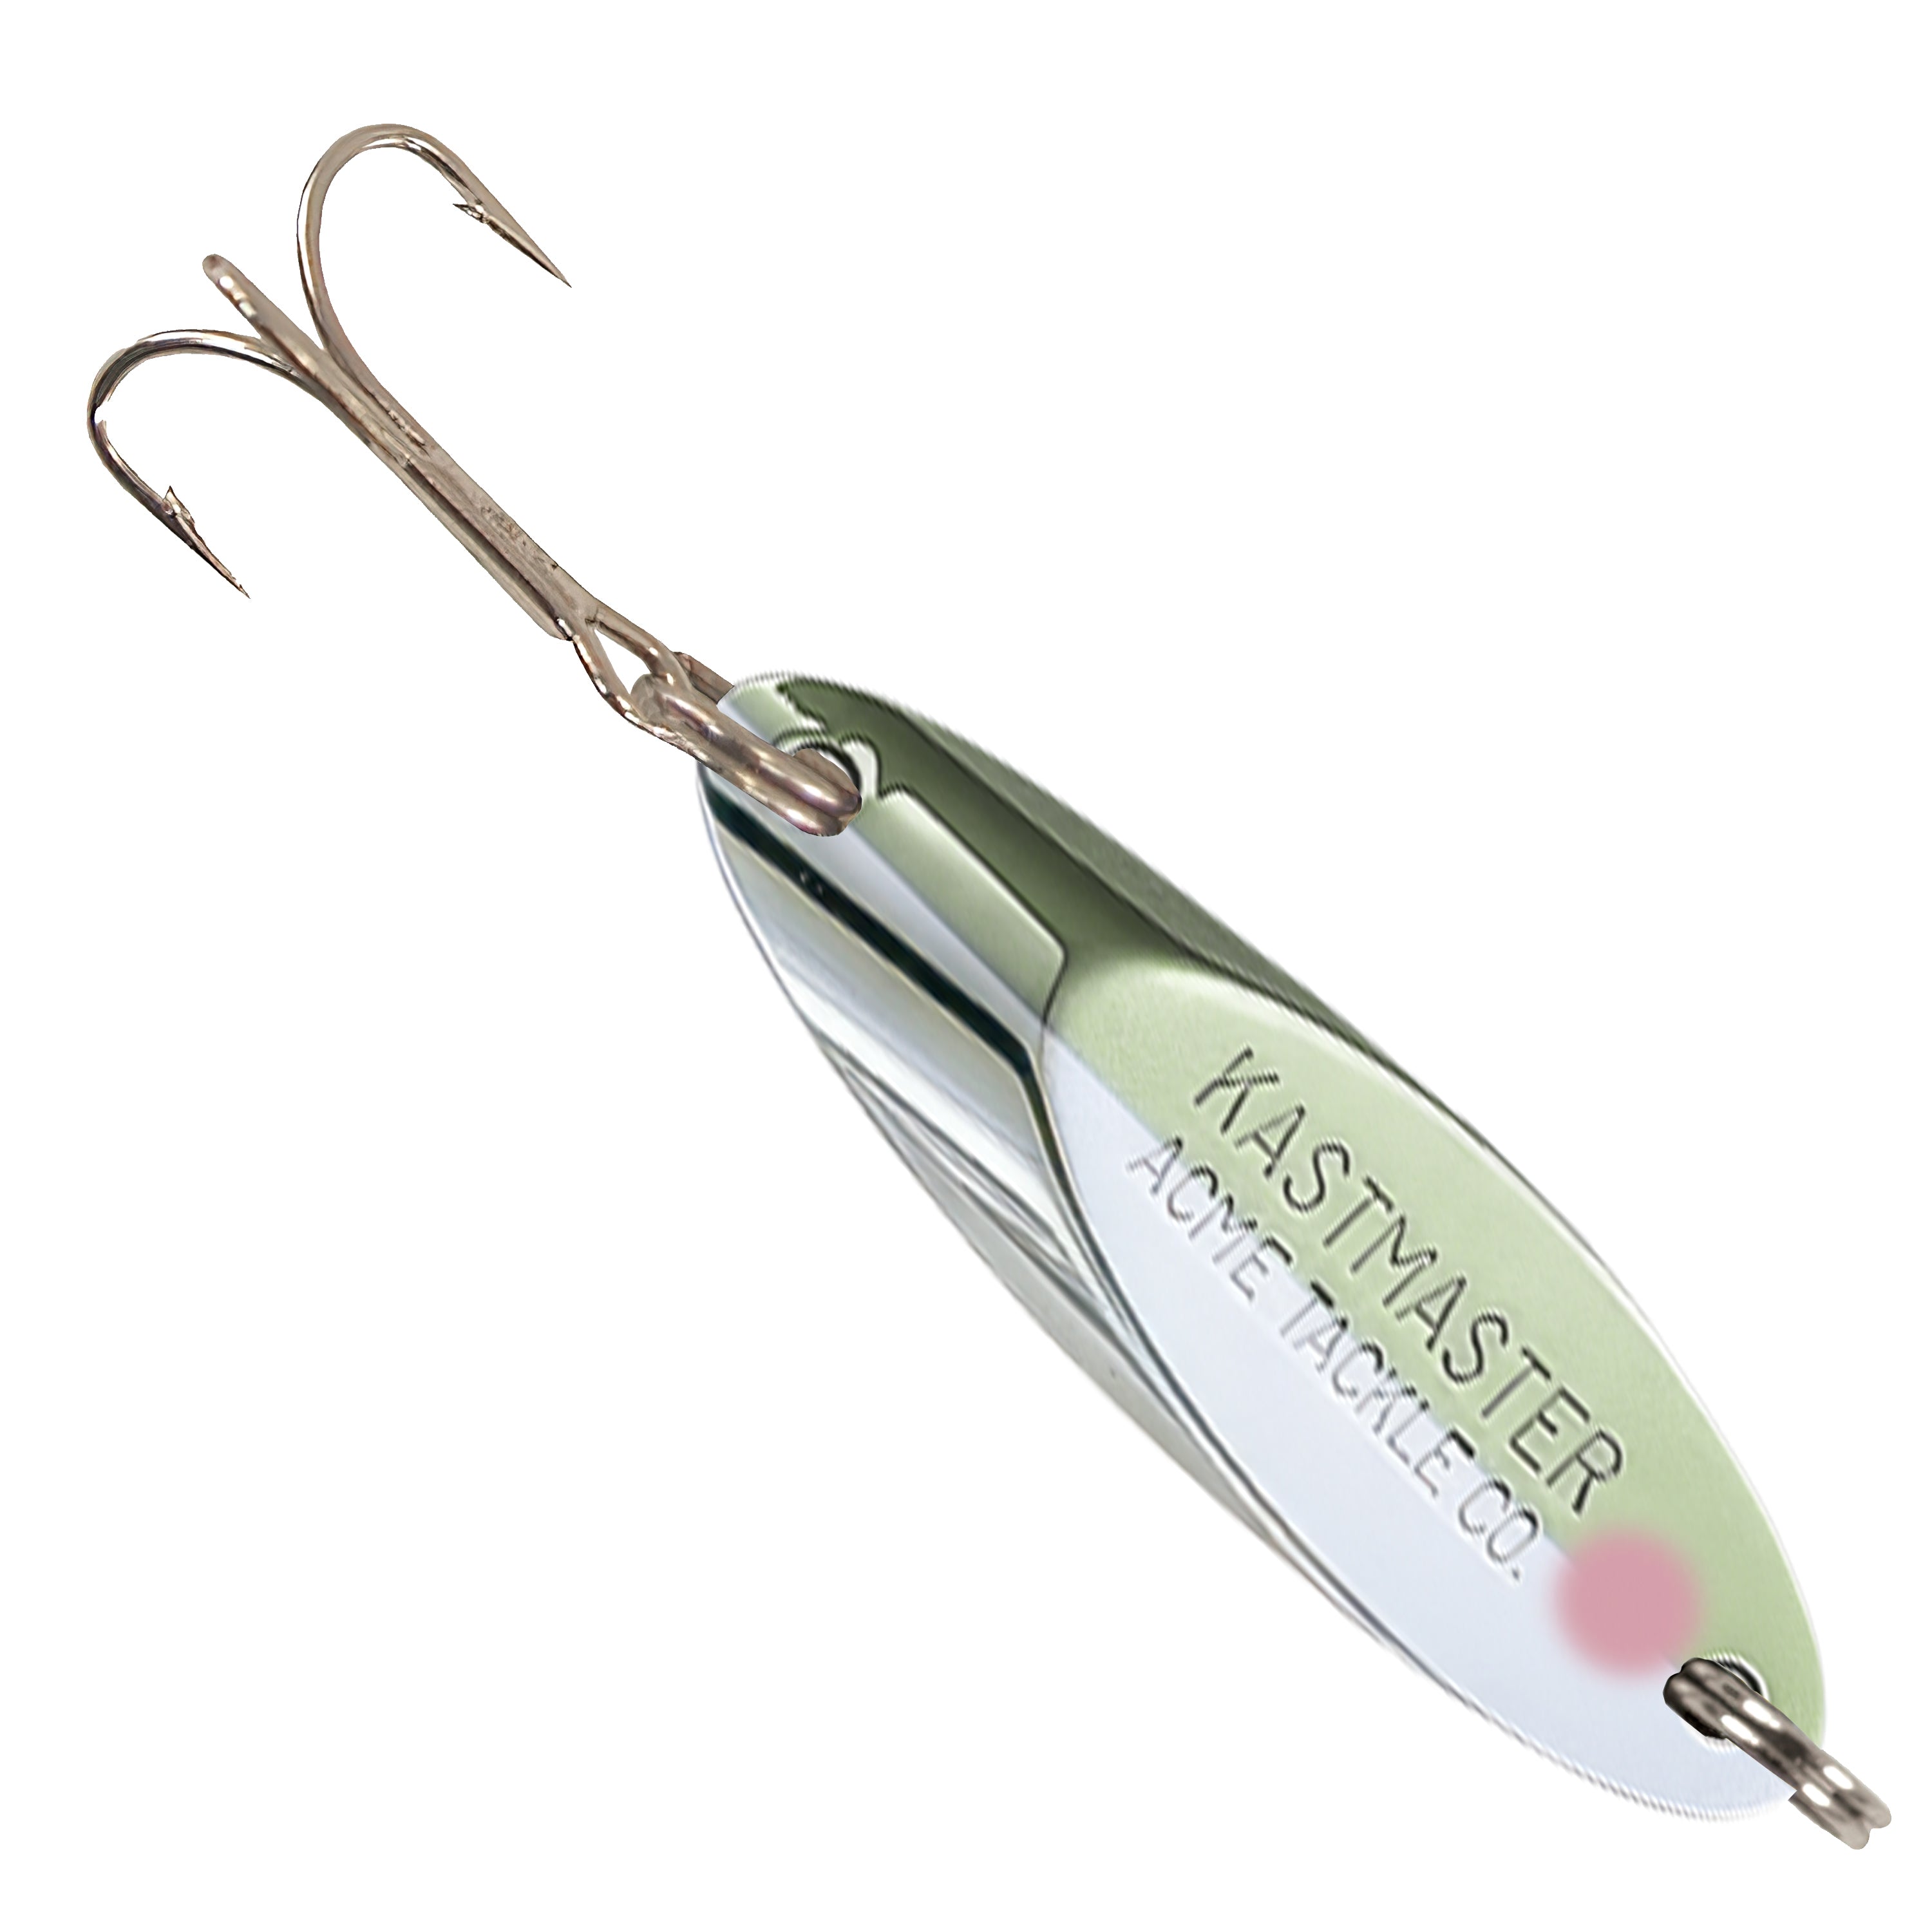 Acme Tackle KASTMASTER Fishing Lures - Plain 3/Pack - 1/4 Ounce